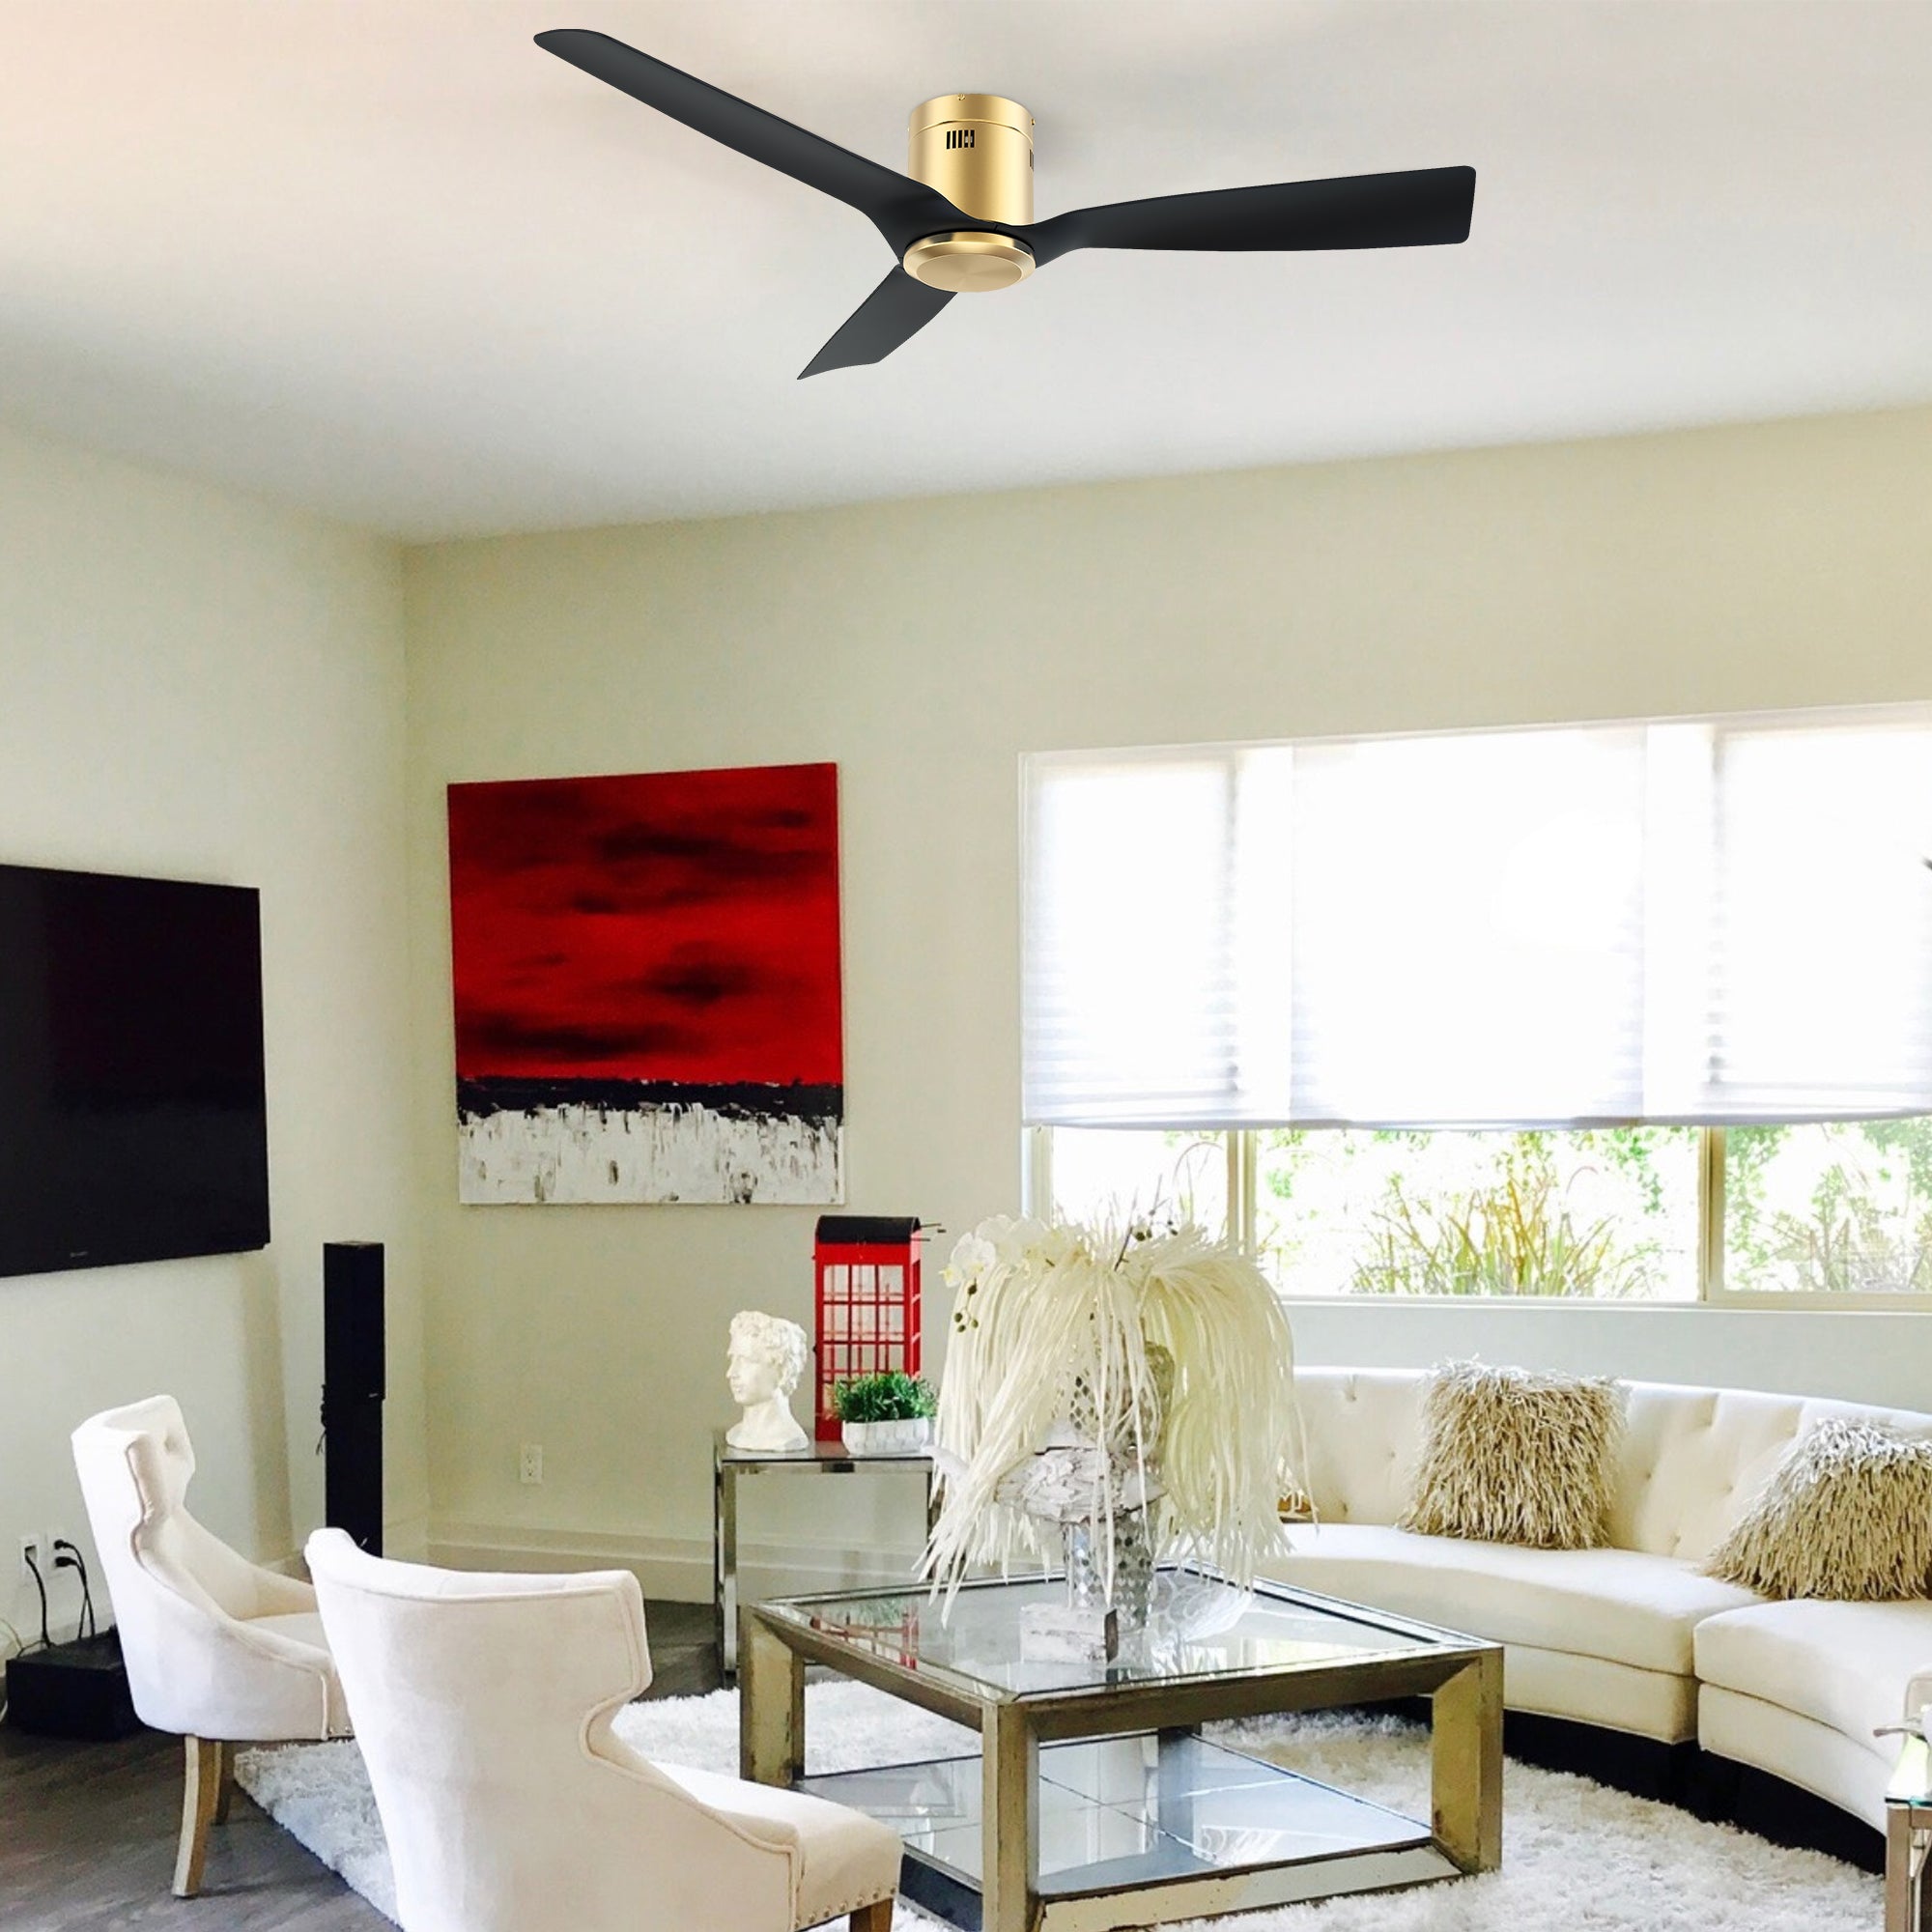 This Modena 52&#39;&#39;ceiling fan keeps your space cooland stylish. It is a soft modern masterpiece perfect for your indoor living spaces. This ceiling fan is a simplicity designing with White finish, use very strong ABS blades. 